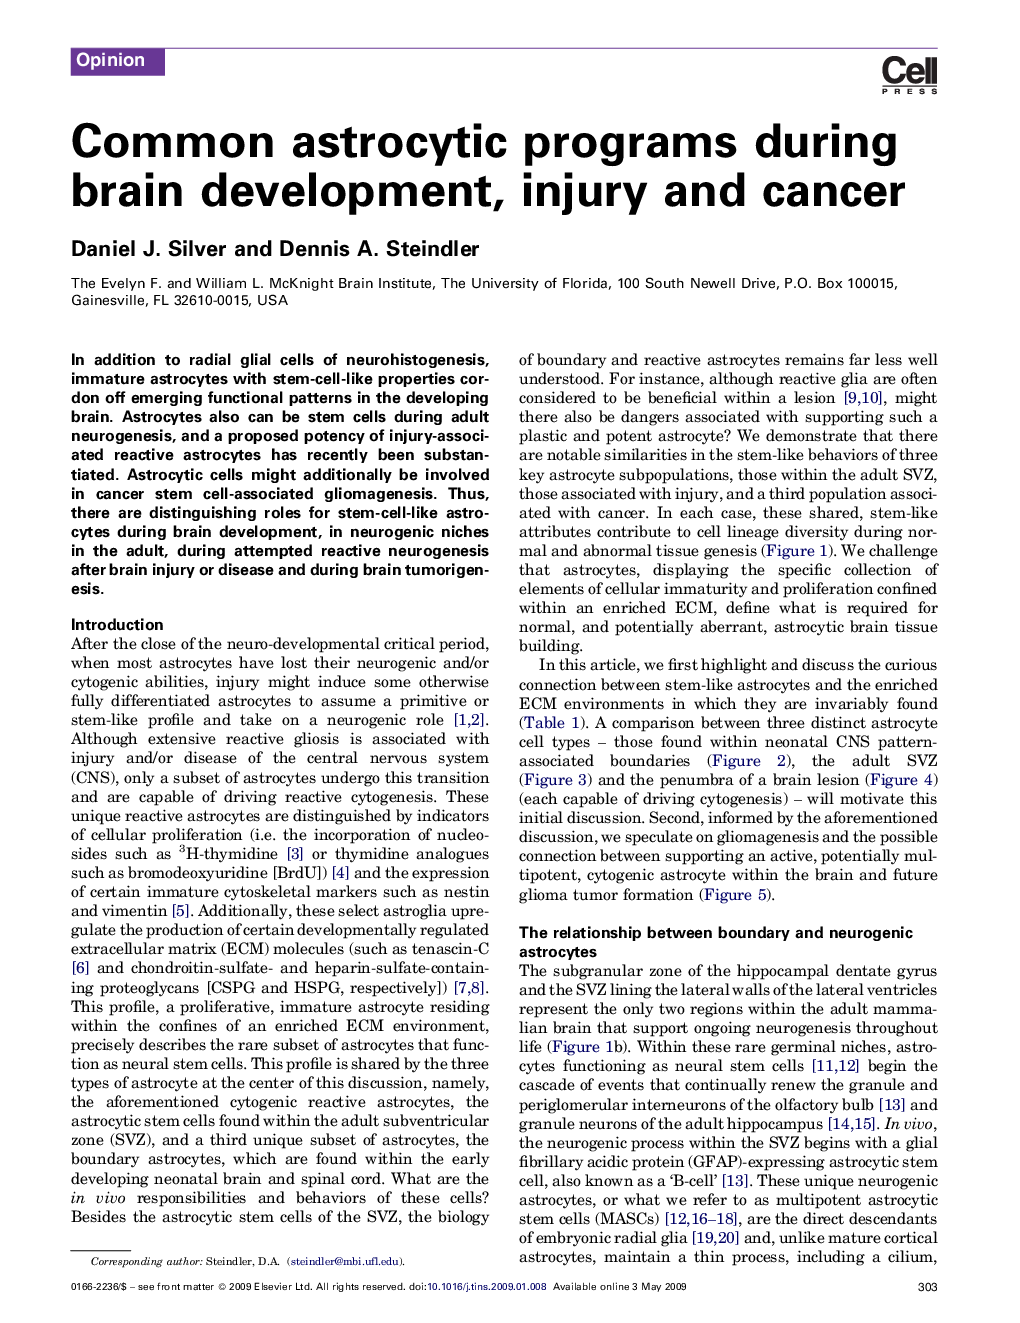 Common astrocytic programs during brain development, injury and cancer